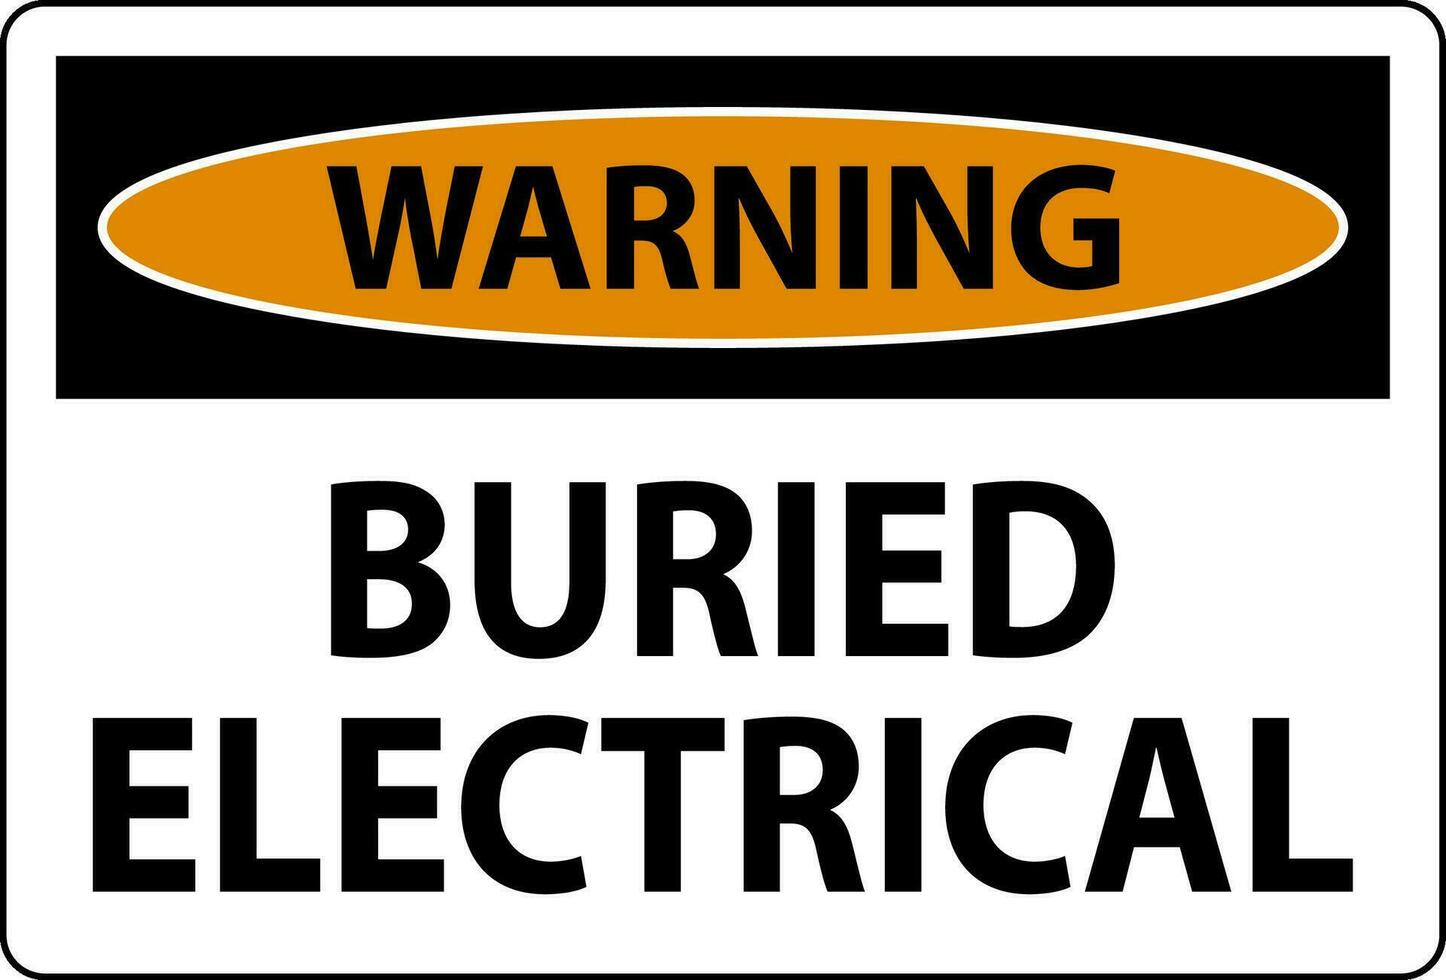 Warning Sign Buried Electrical On White Bacground vector